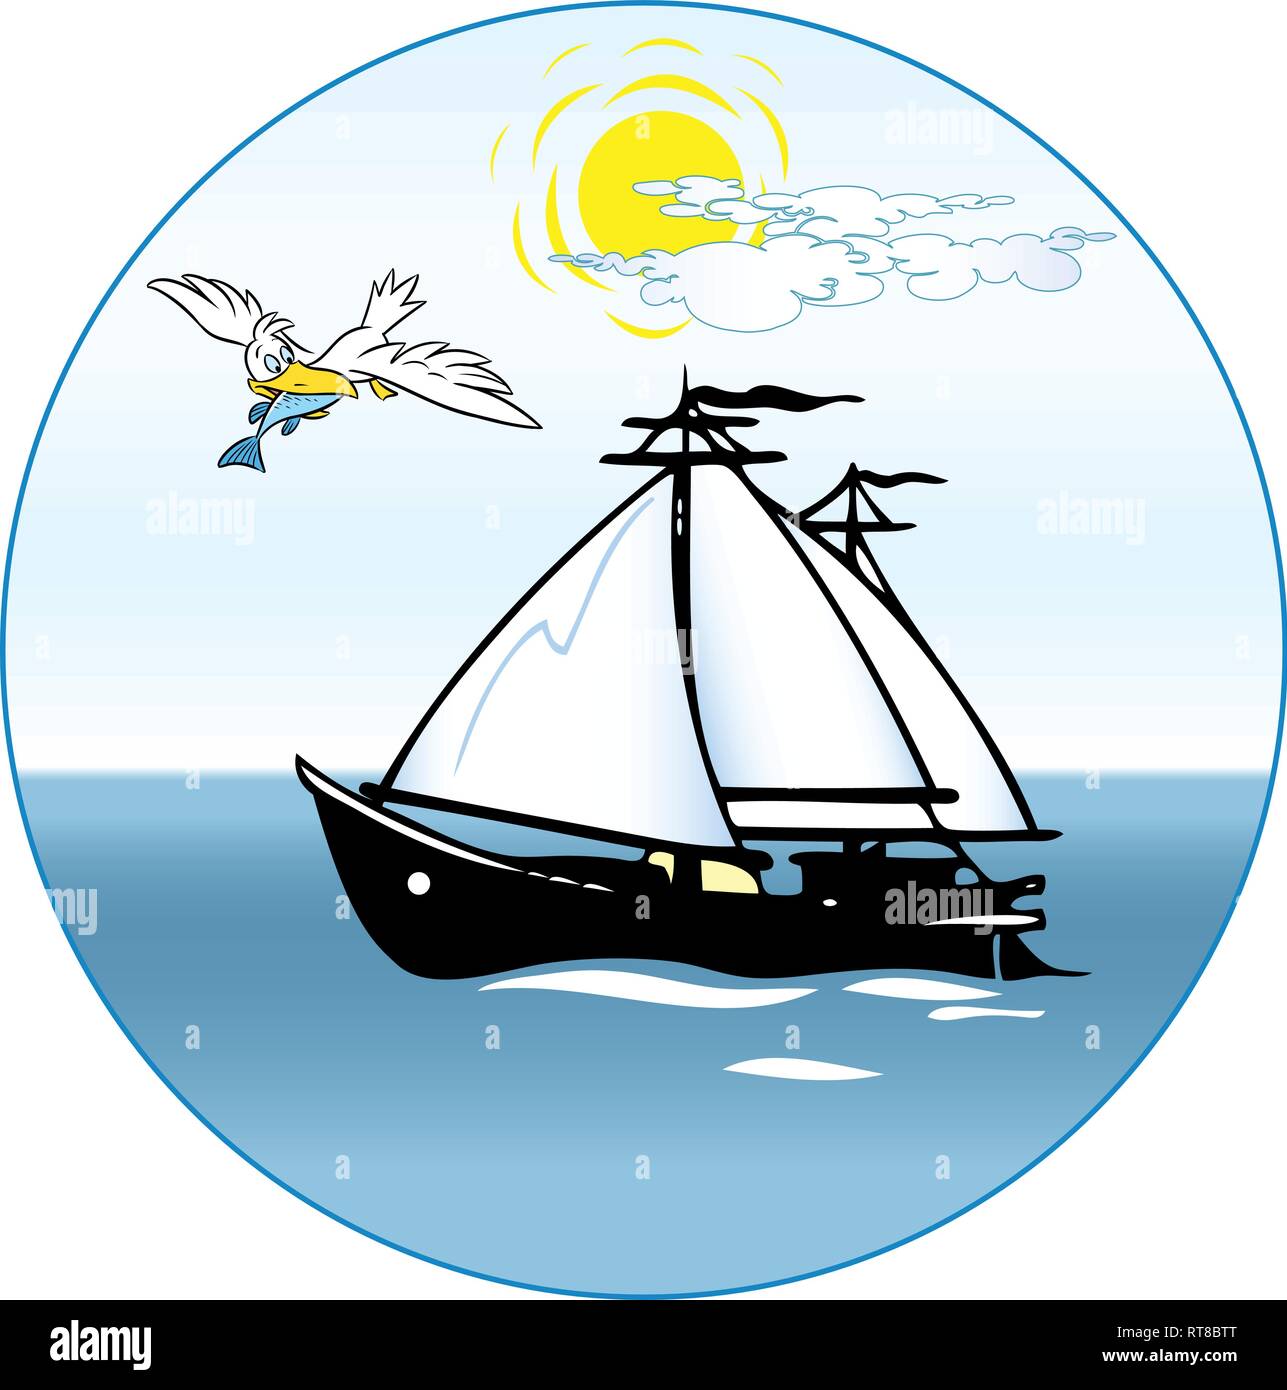 In the illustration, a cartoon ship sailing boat goes into the sea, a large bird flies nearby with prey Stock Vector